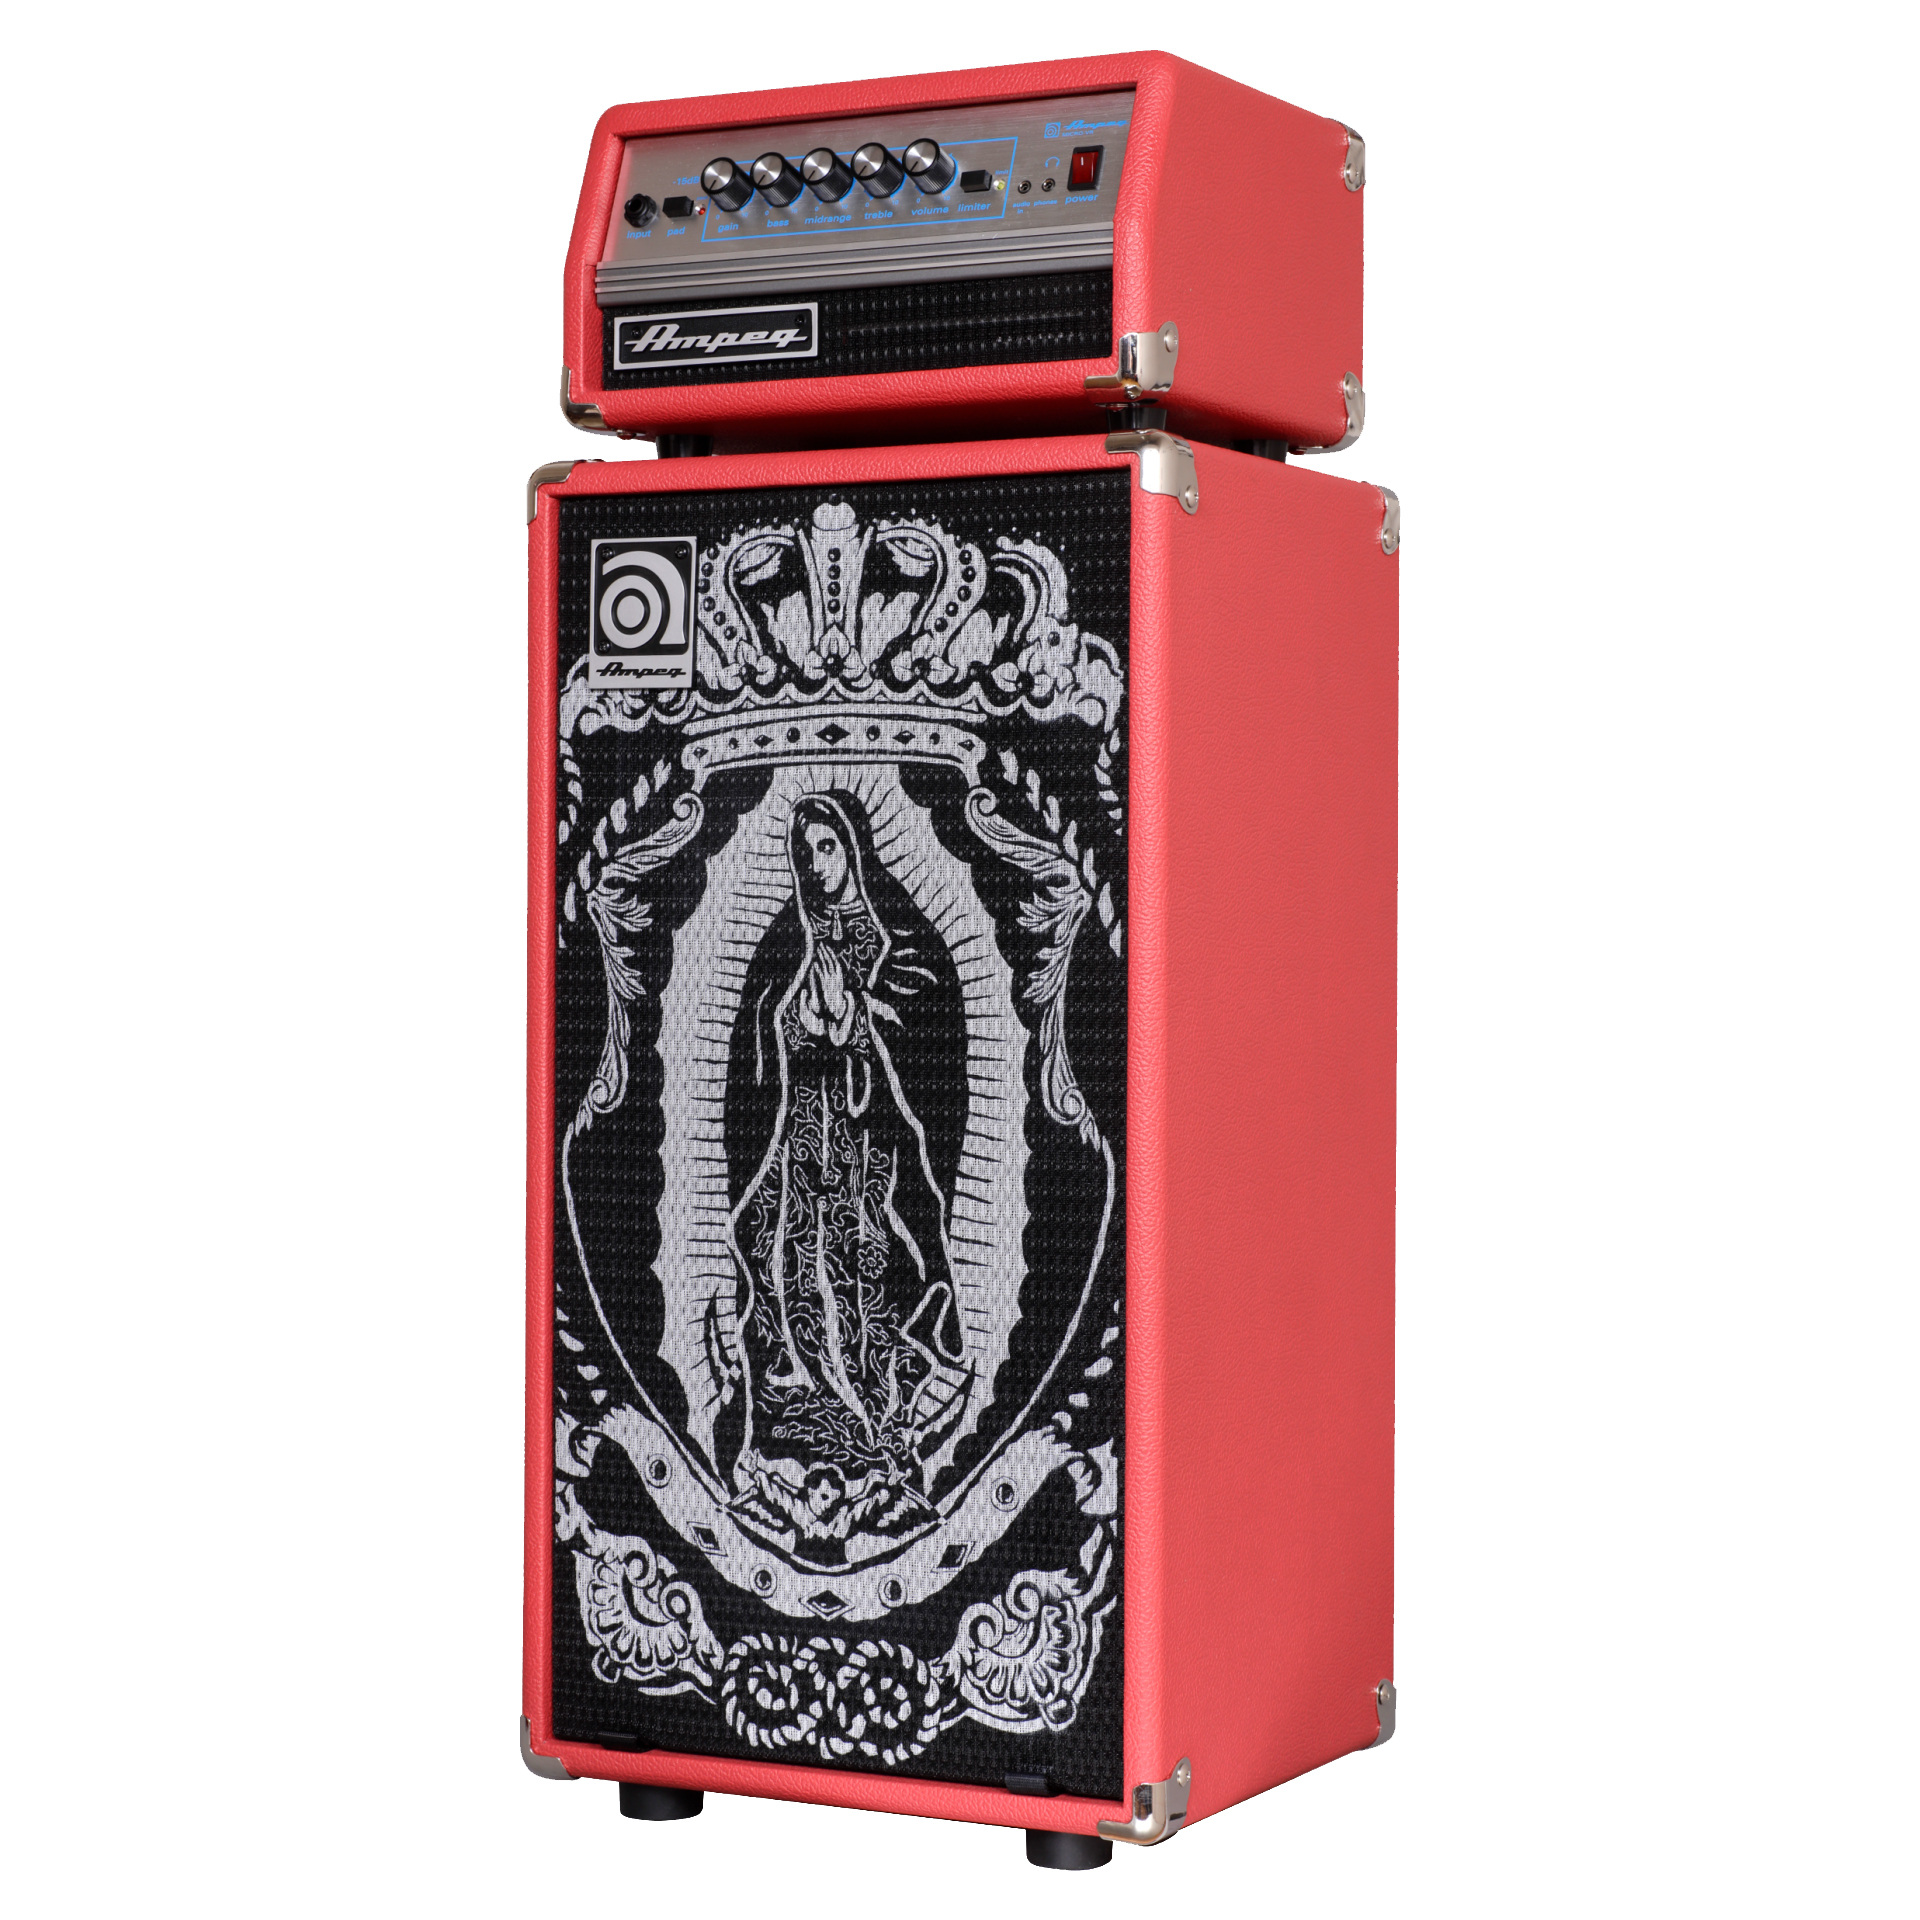 Micro-VR Limited Edition J - ニュース - Ampeg Japan